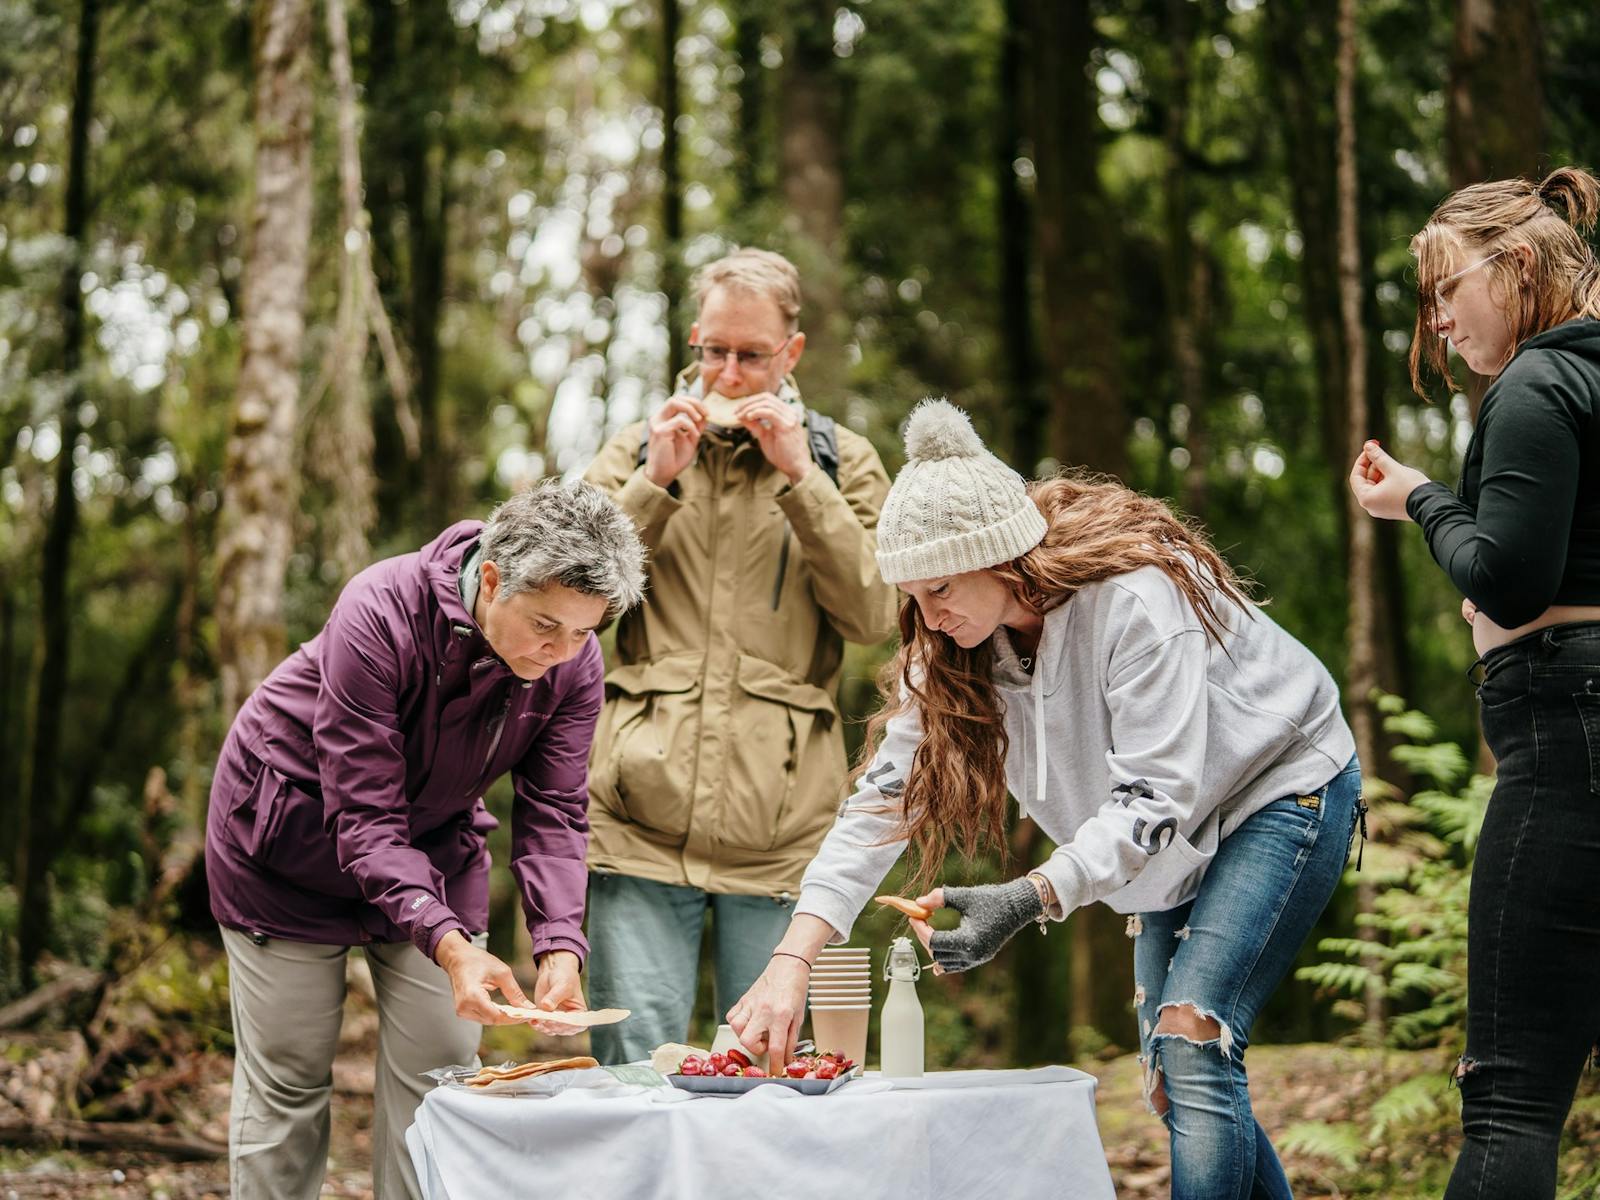 Tour group helping themselves to a cheese platter amidst the beautiful trees of the Tarkine